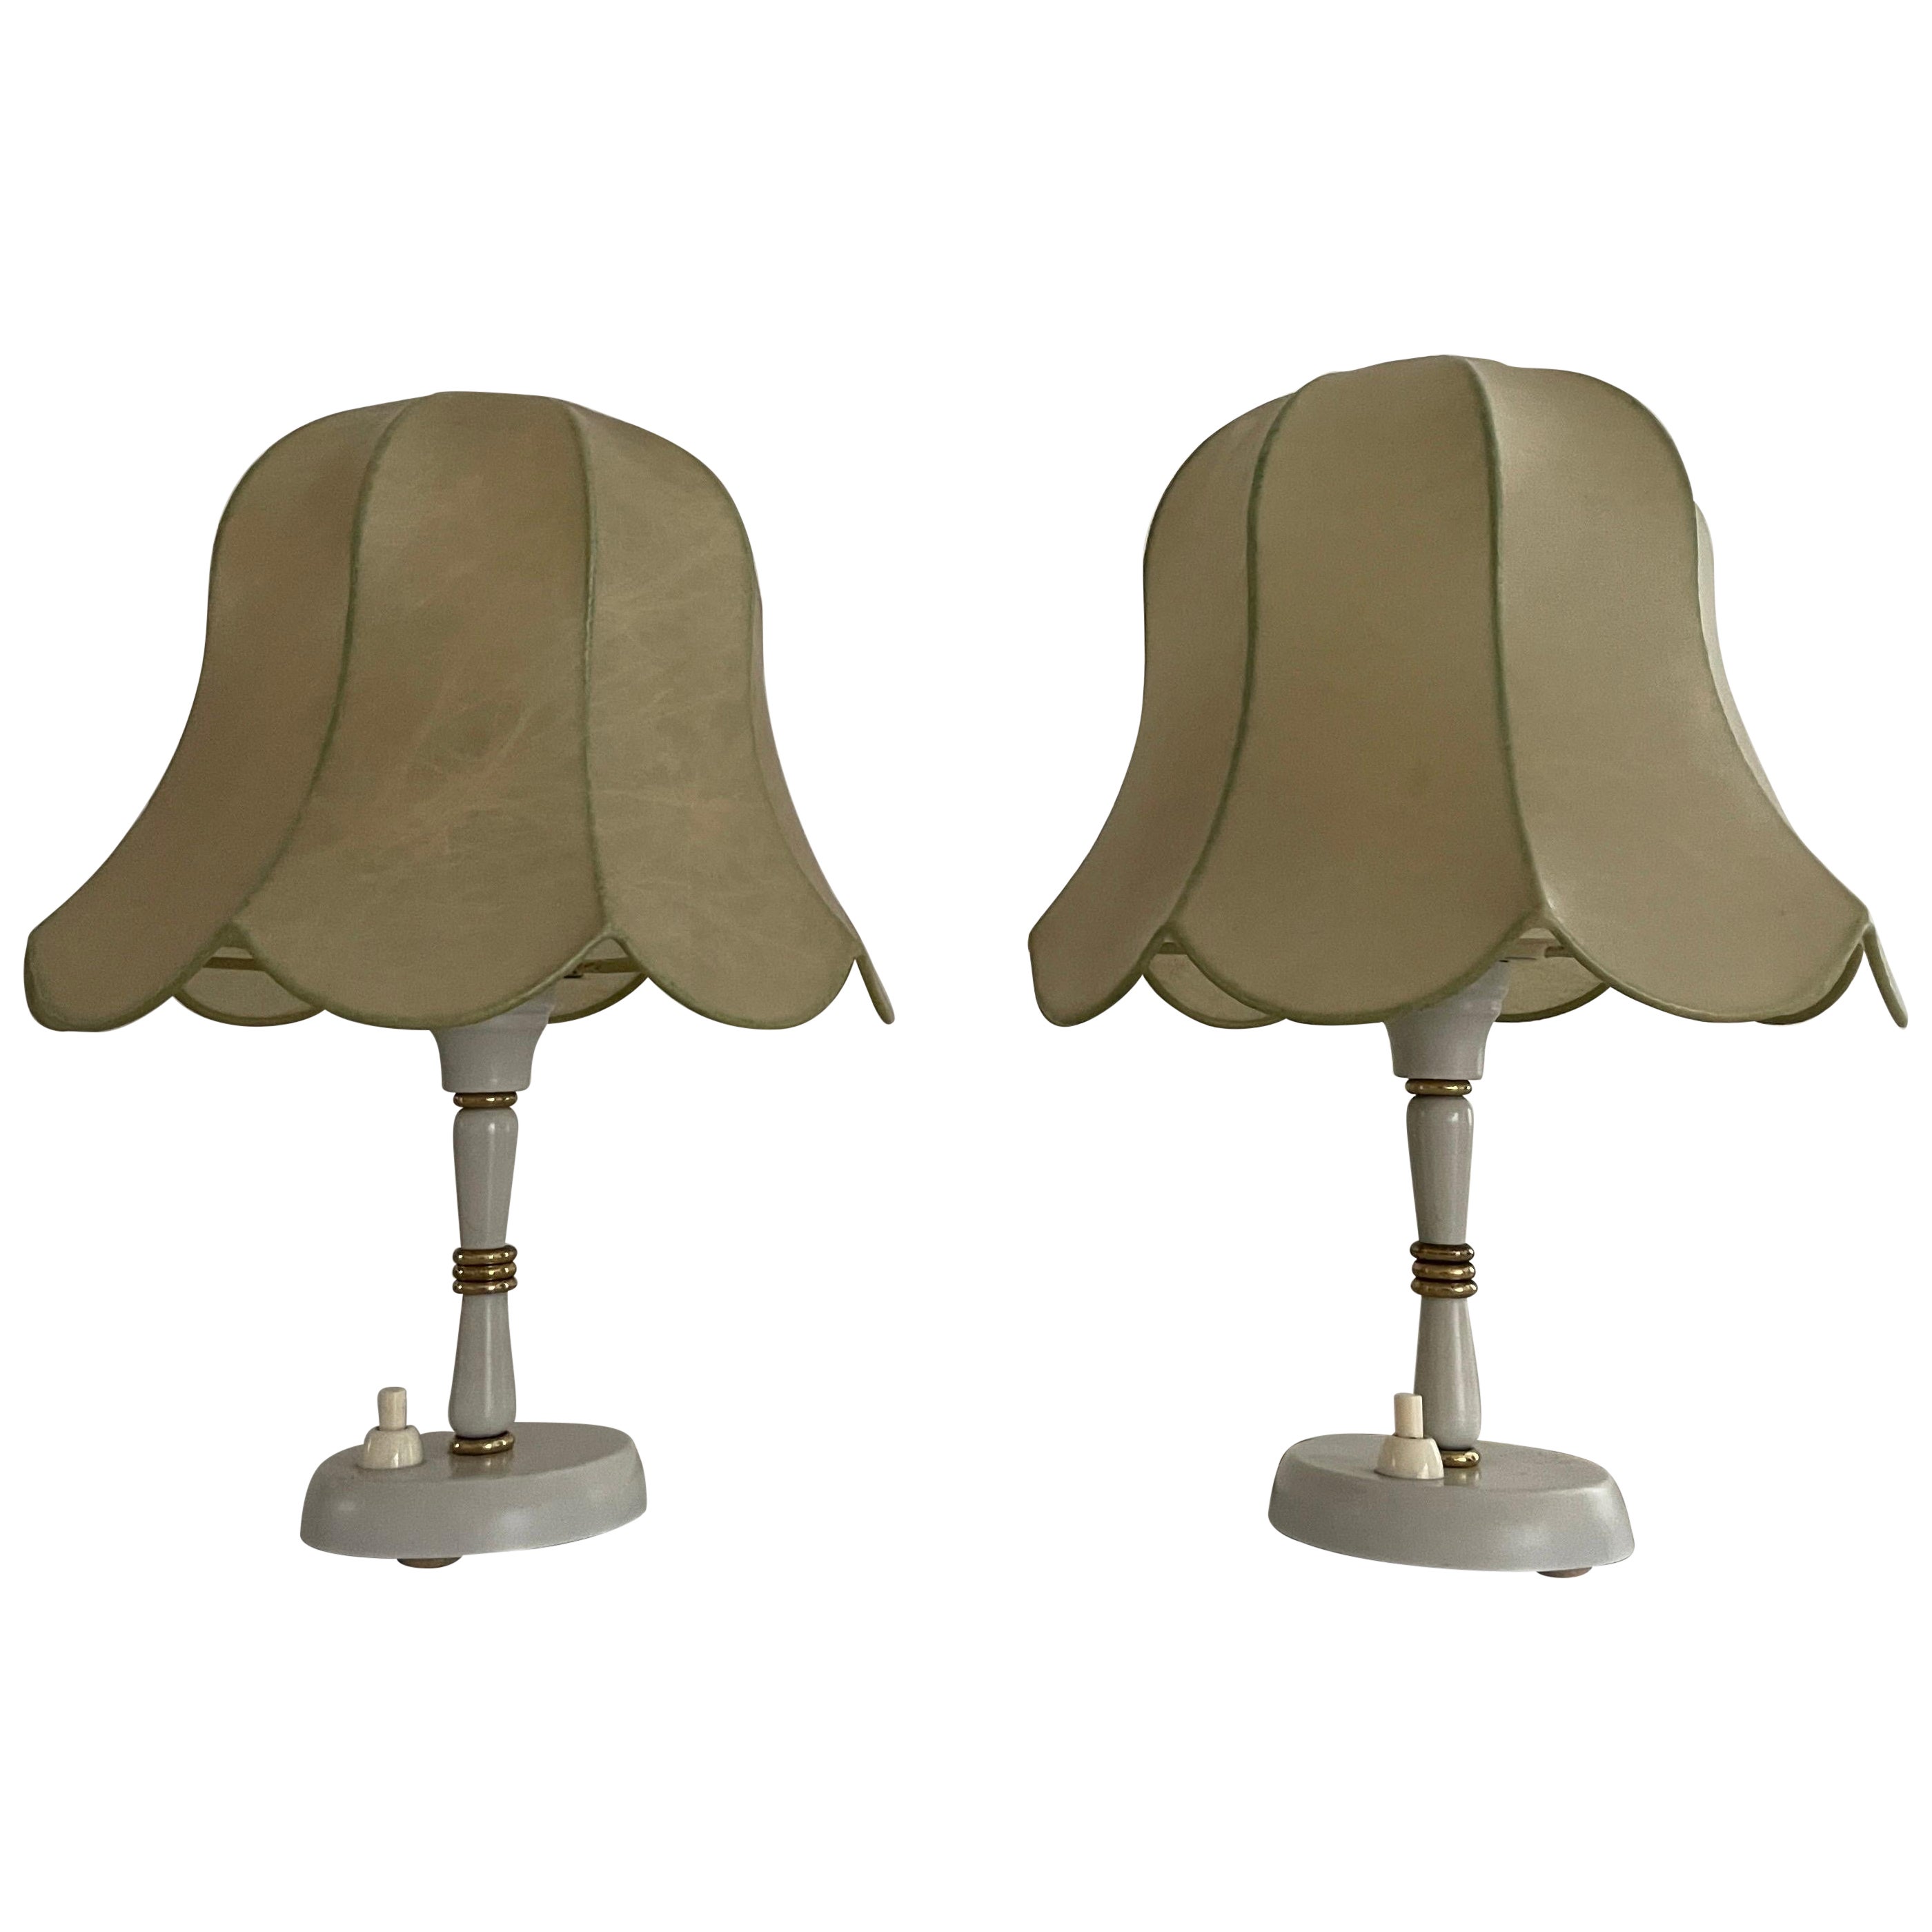 Cocoon Shade Metal Body Pair of Bedside Lamps by GOLDKANT, 1970s, Germany For Sale